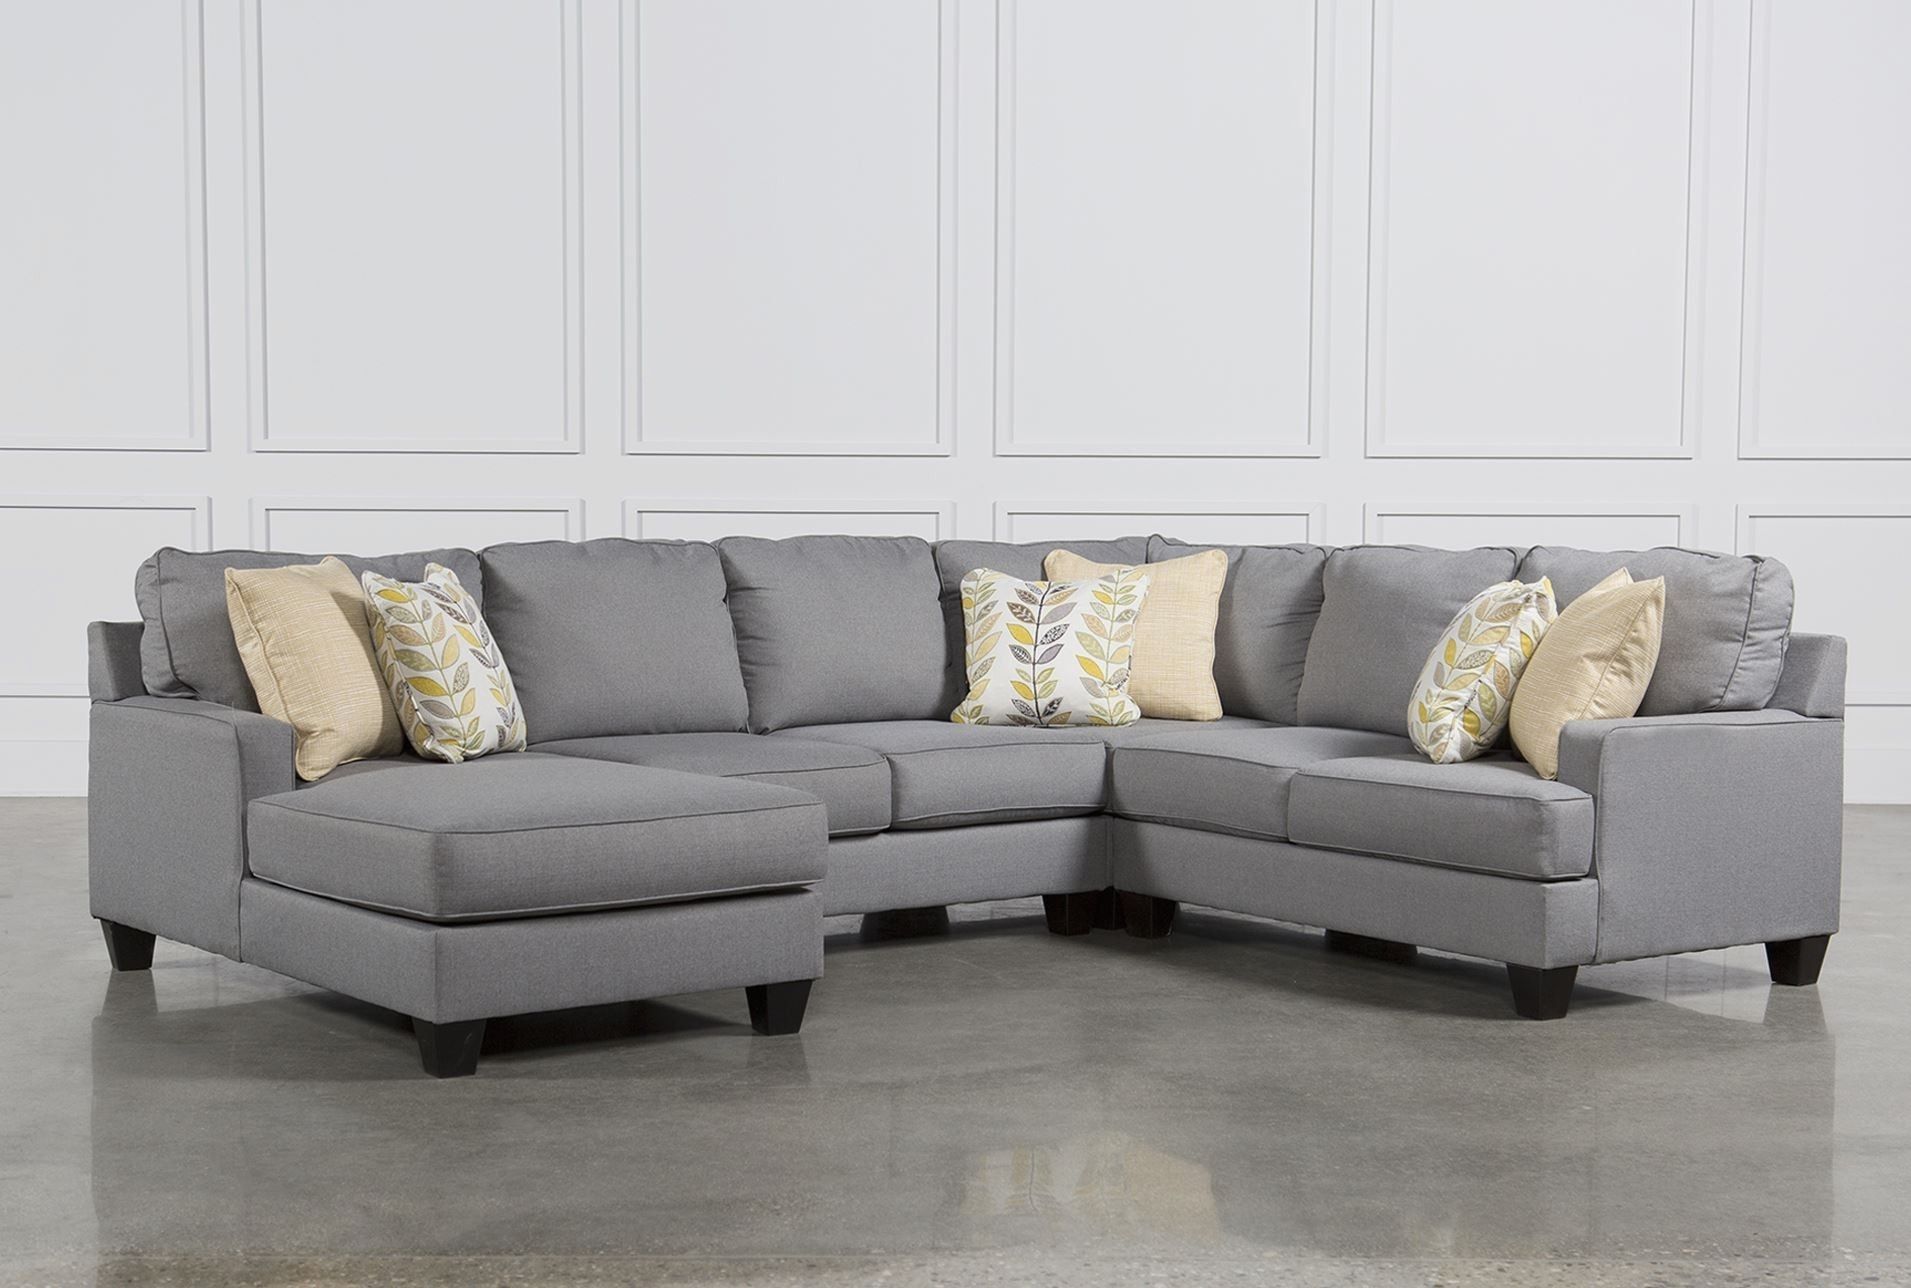 Living Spaces Sectional Sofas Inspirational Sofa Alder 4 Piece For Living Spaces Sectional Sofas (View 8 of 10)